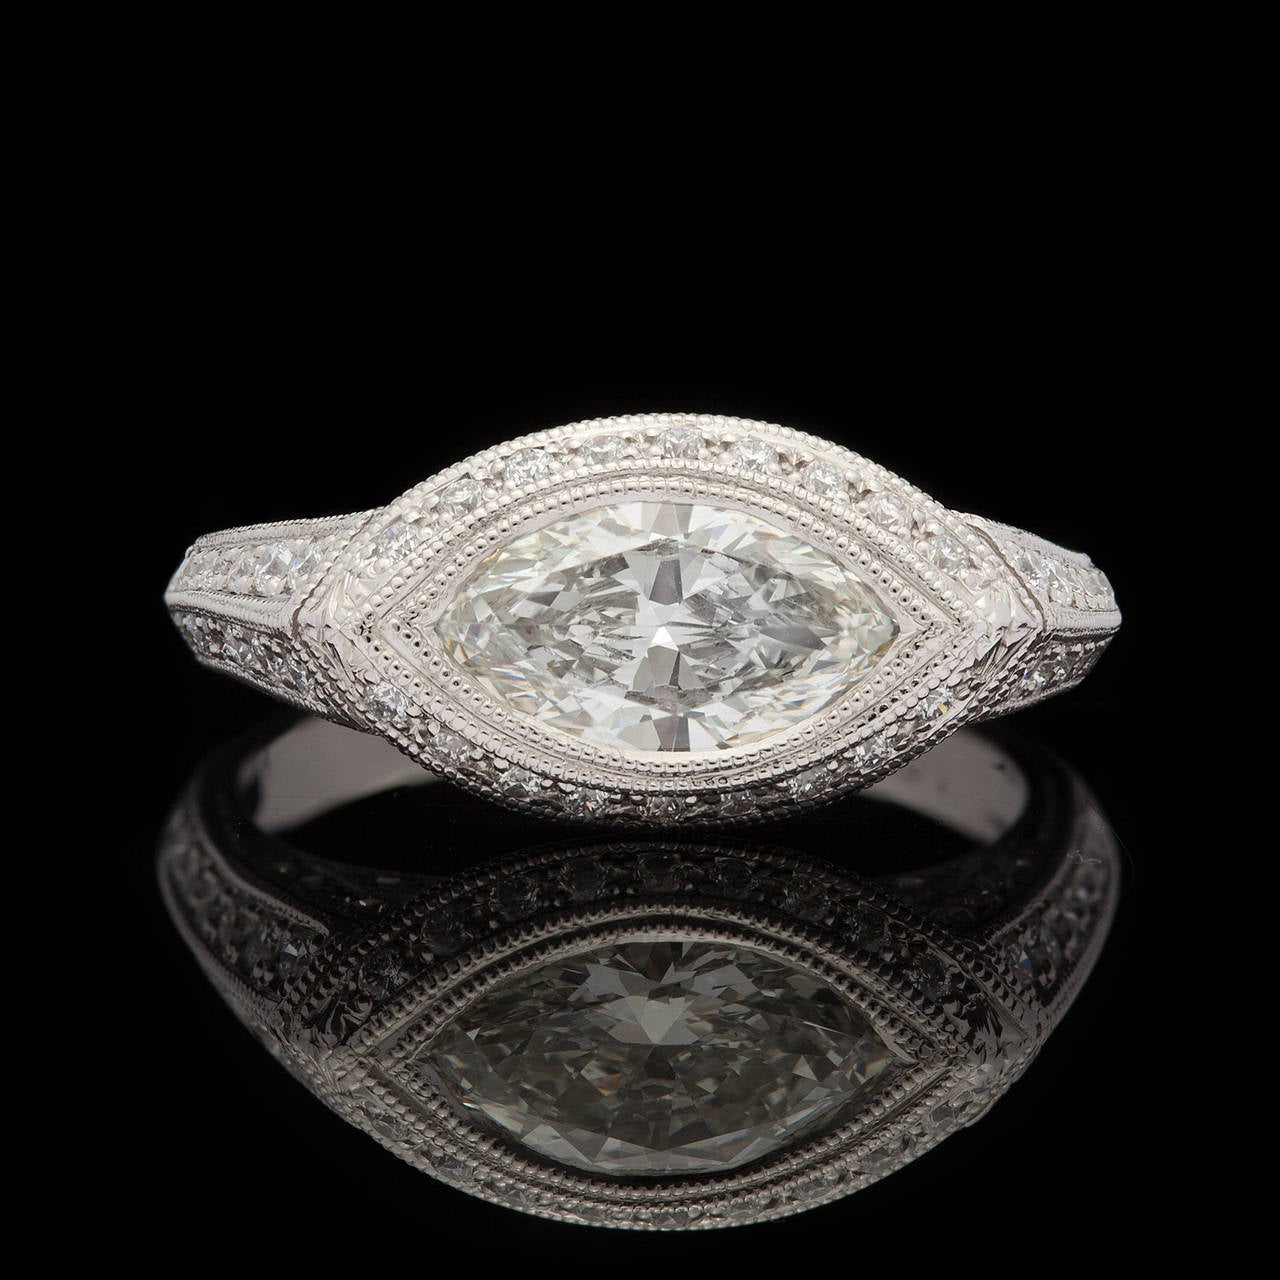 Custom Deco Style Diamond Ring features a 1.20 carat Marquise Cut Center Diamond Surrounded by 76 Round Brilliant Cut Diamonds totaling 0.50 carats set in Platinum. This marquise diamond is bezel set in a halo style weighing 6.3 grams & fits a size